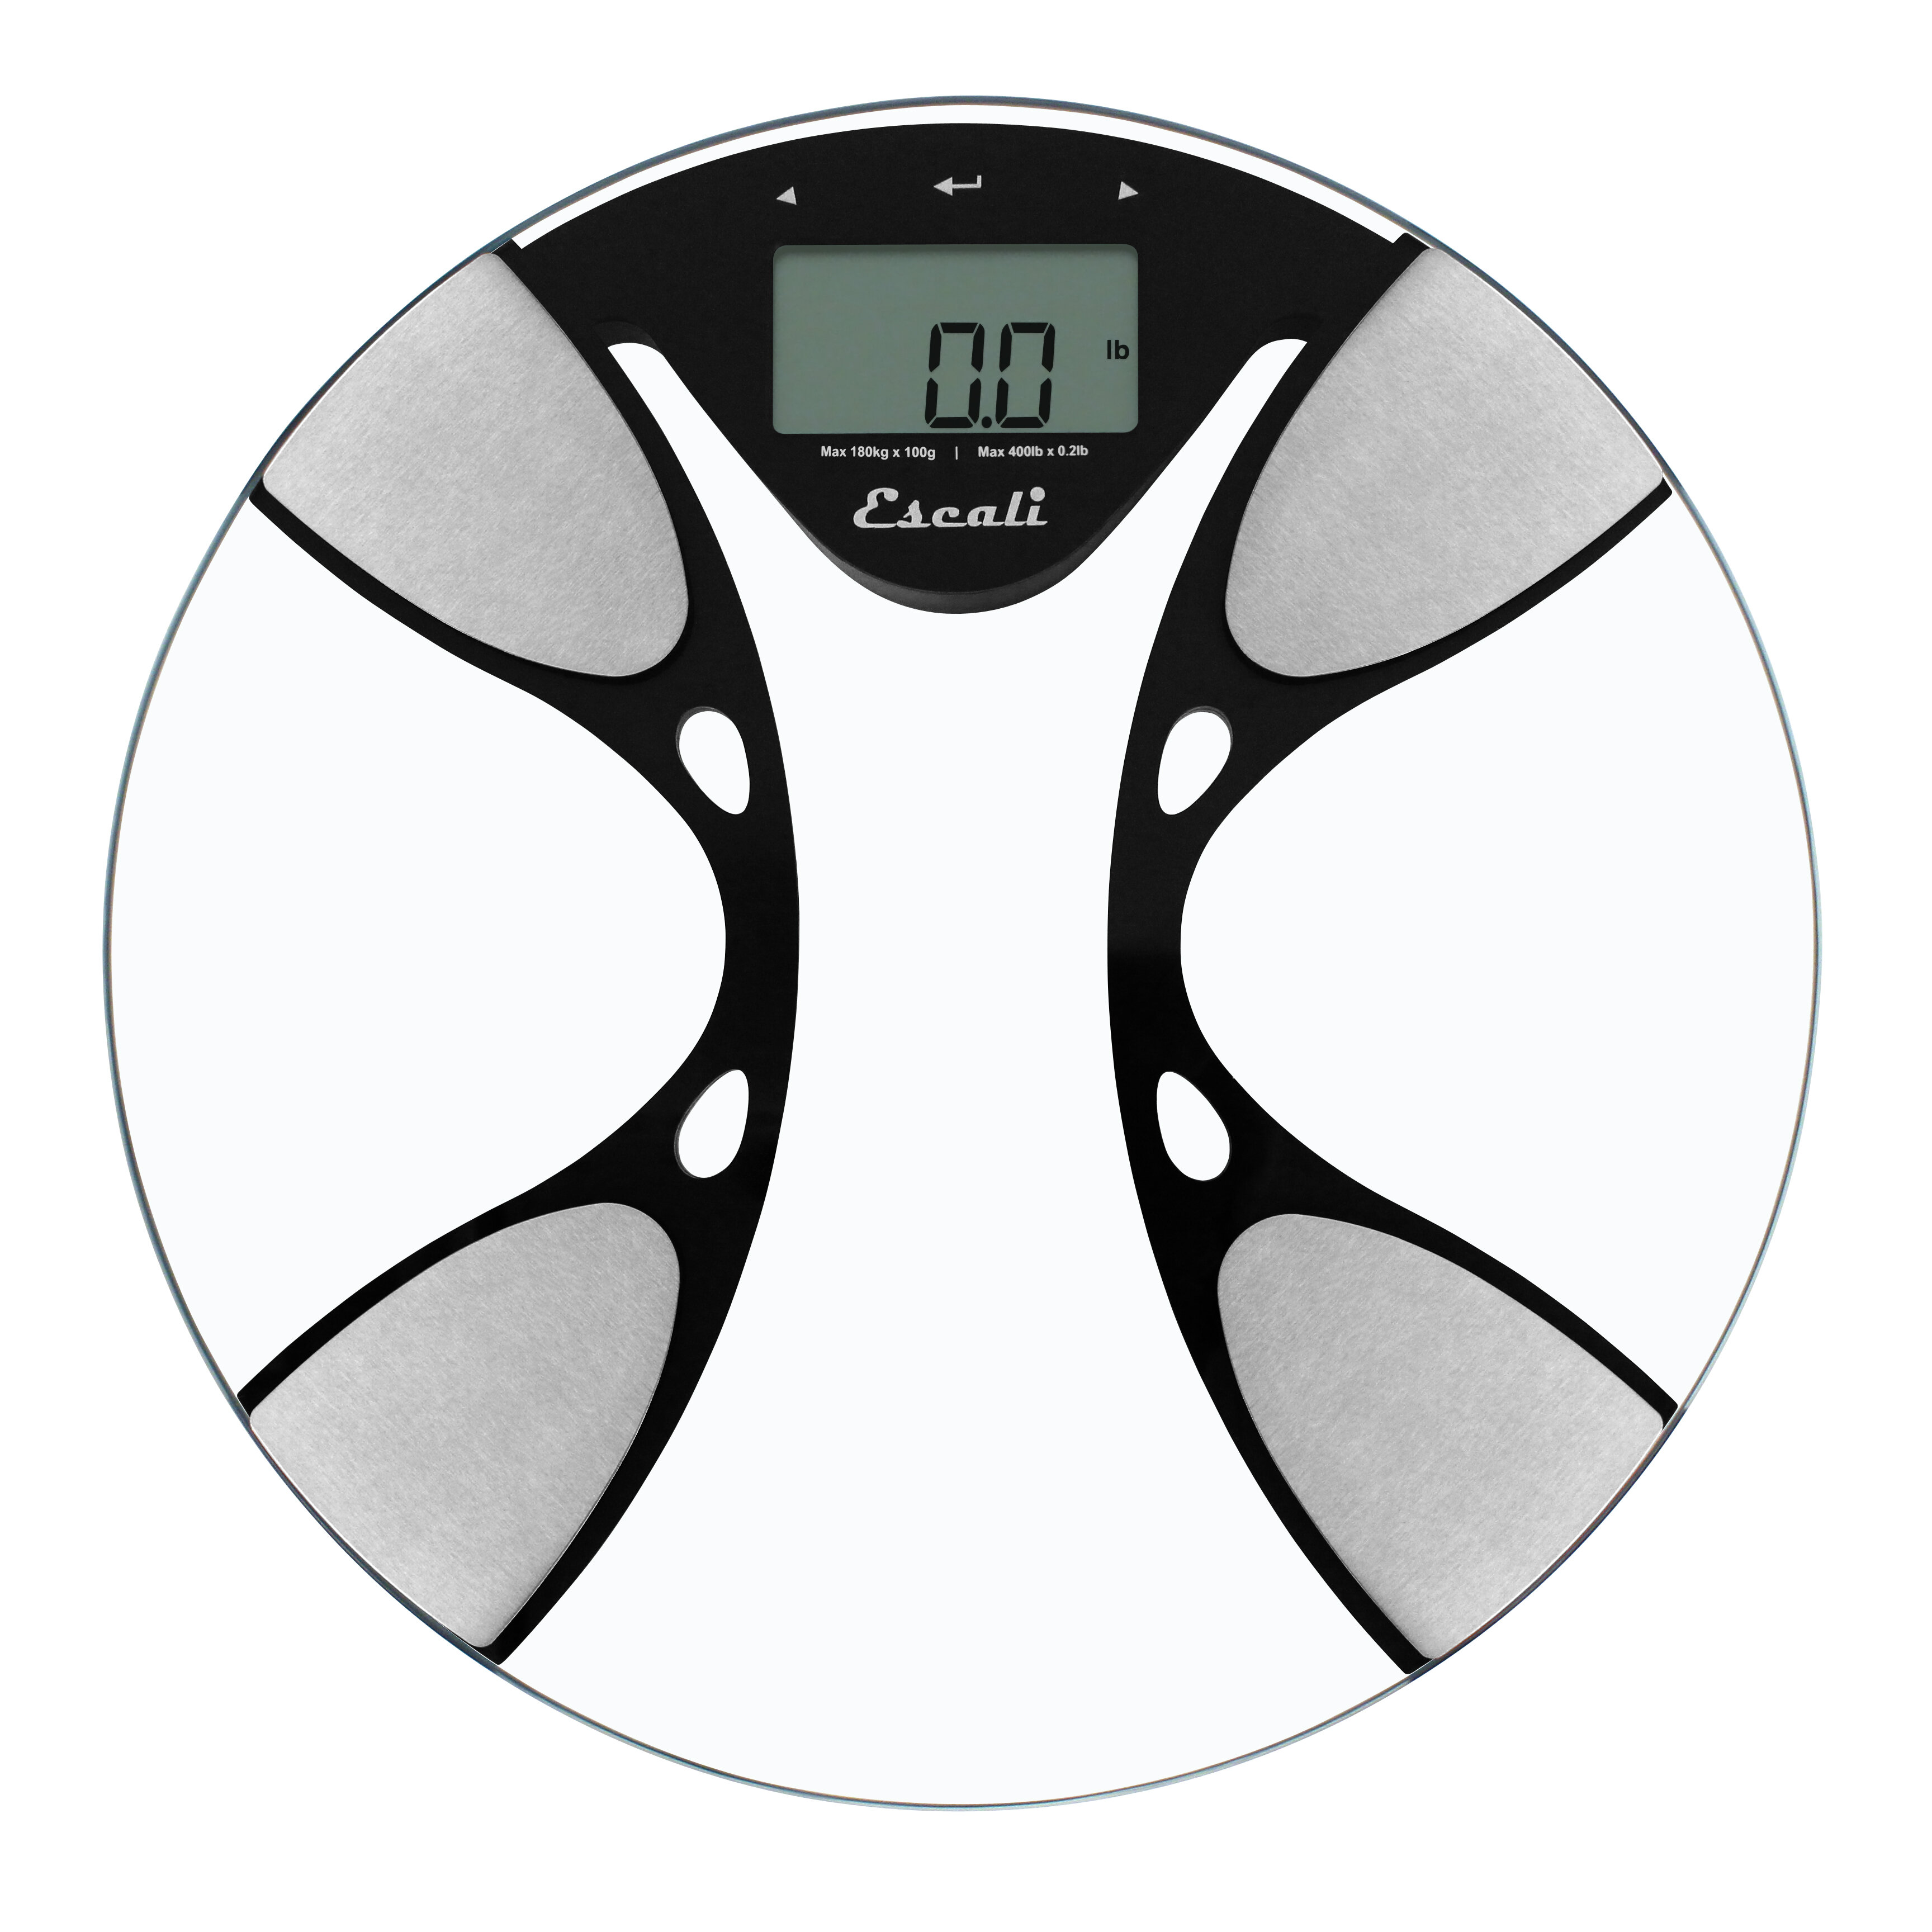  Thinner by Conair Scale for Body Weight, Analog Bathroom Scale  in Black : Health & Household